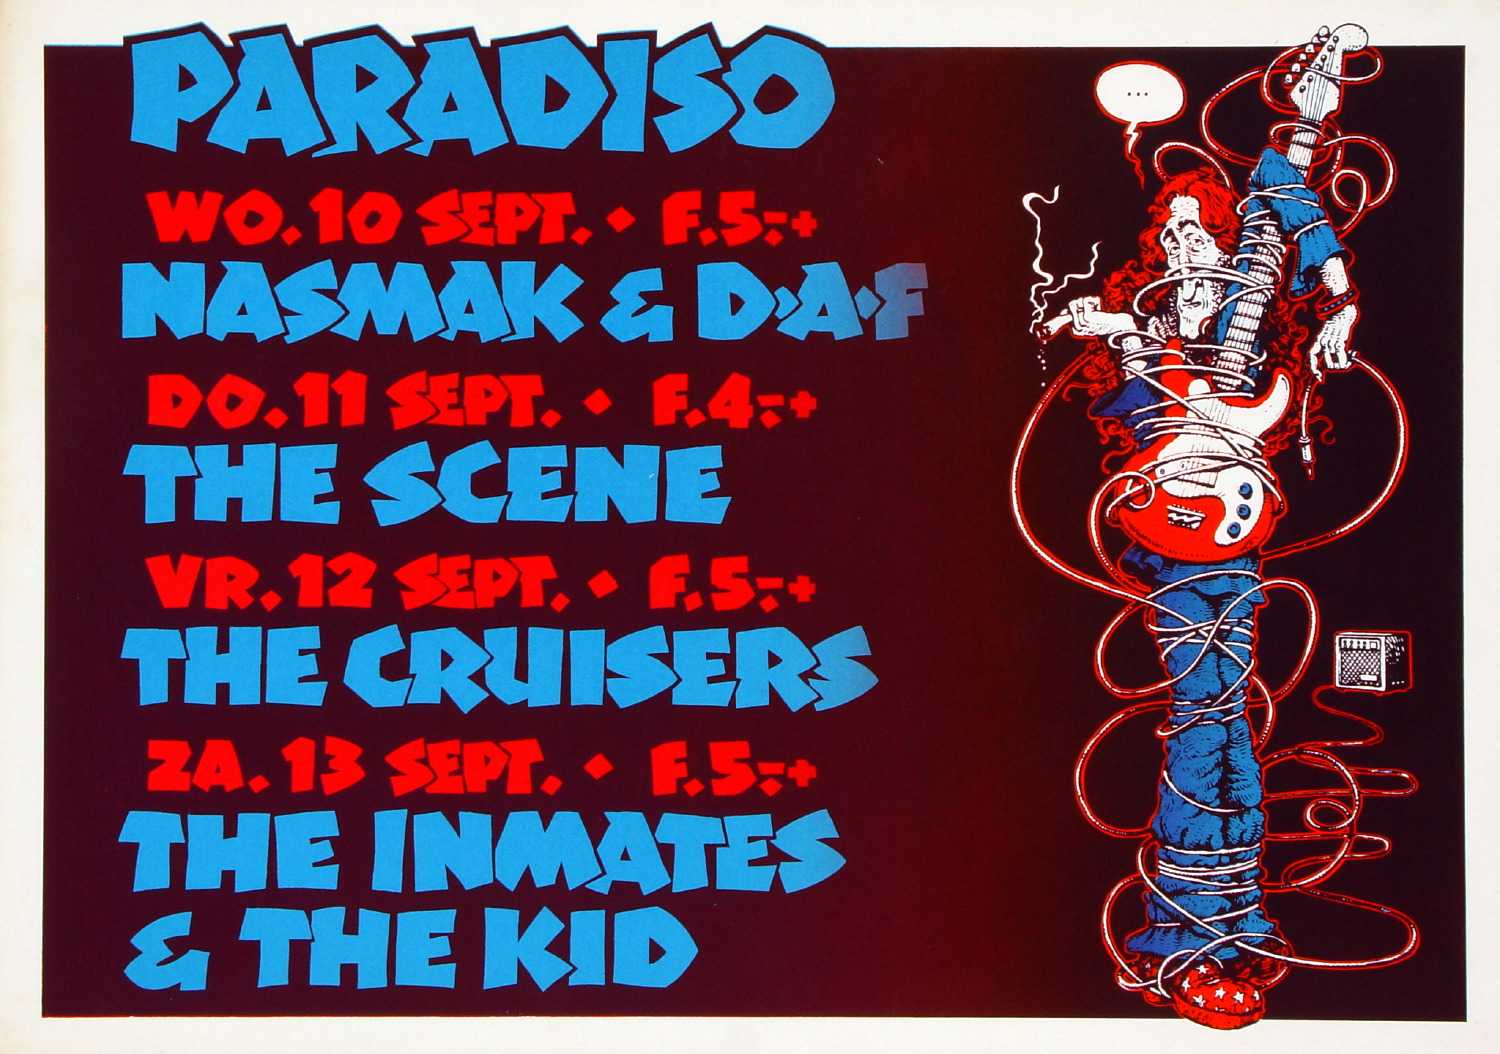 Featured image for “The Scene - Cruisers - Inmates & the Kid - september 1980”